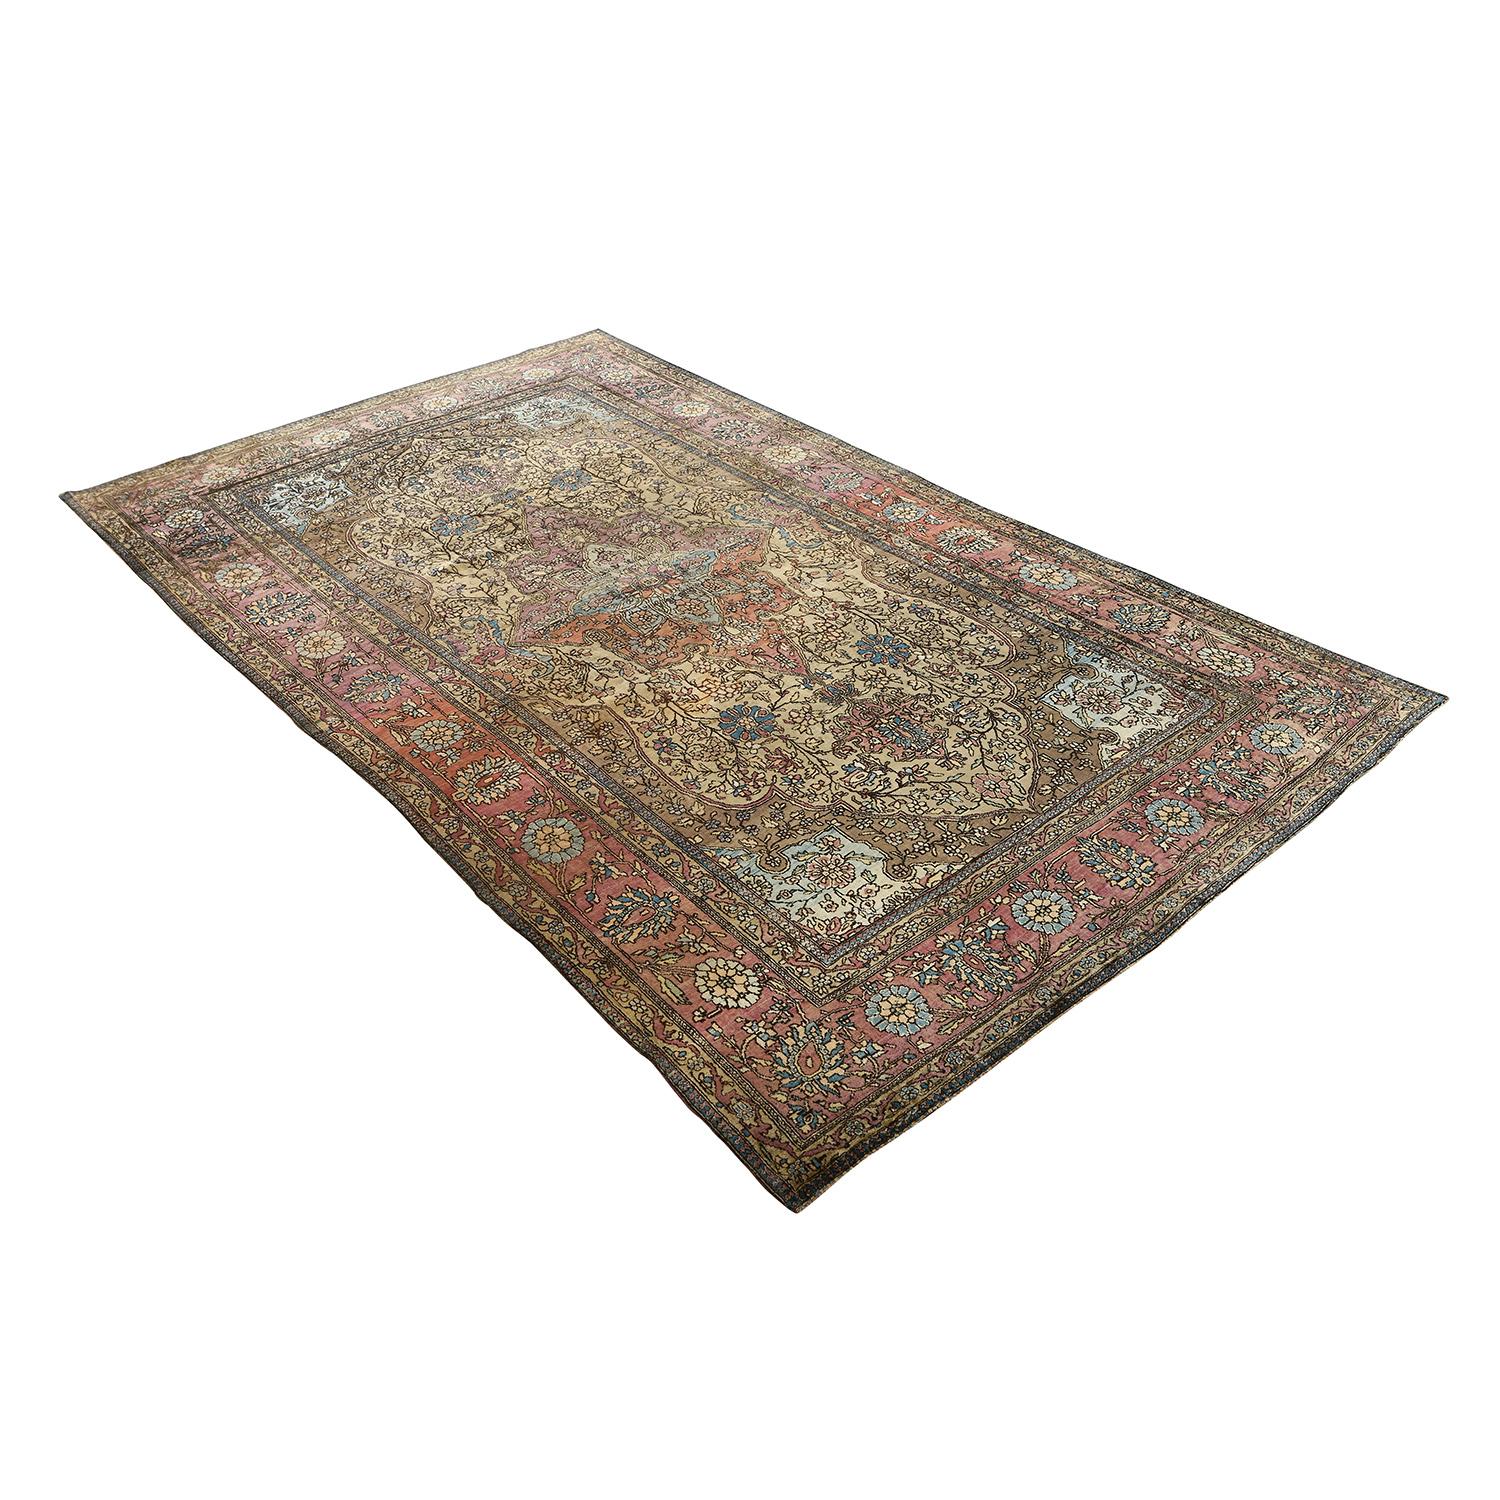 This Pure Silk Antique Farahan is a masterpiece of enduring opulence and unparalleled craftsmanship. Originating from the esteemed Farahan region in Persia, these rugs are not just floor coverings; they are exquisite works of art that radiate